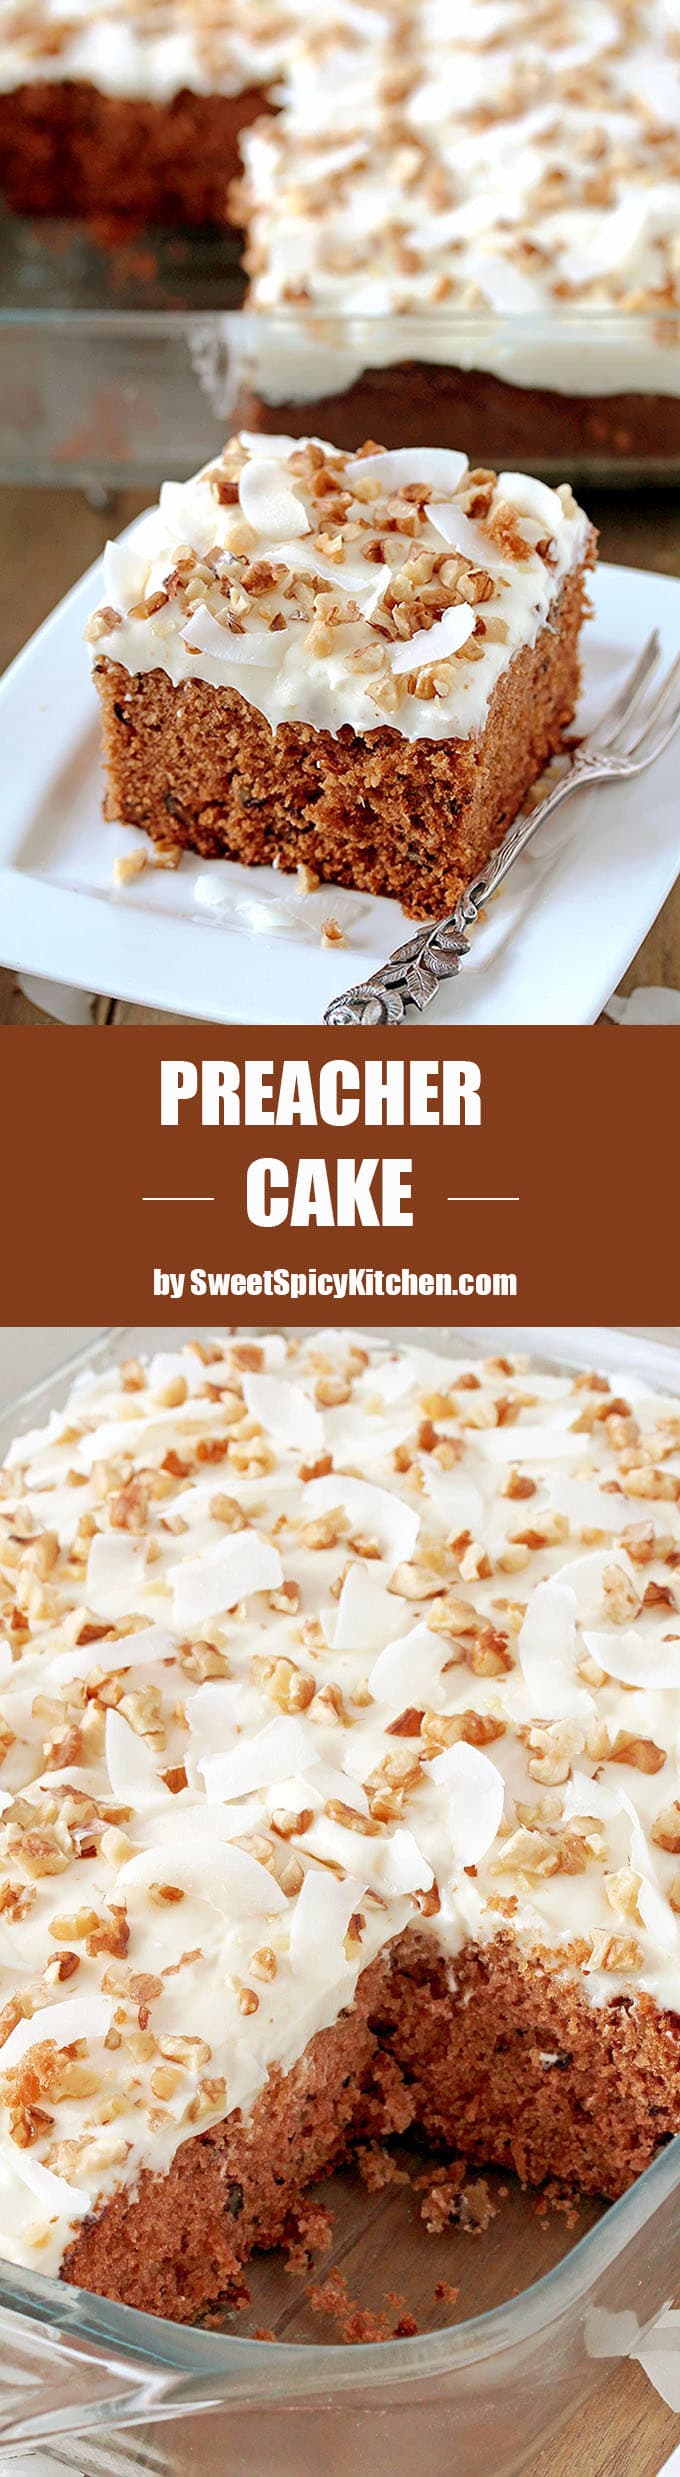 Preacher Cake – easy, super tasty cake with rich, tropical taste topped with whipped cream cheese frosting, chopped walnuts and coconut chips. This harmony of flavors is made for true pleasure. Pineapple, coconut and walnut combination in this cake is perfect and gives it a special taste.